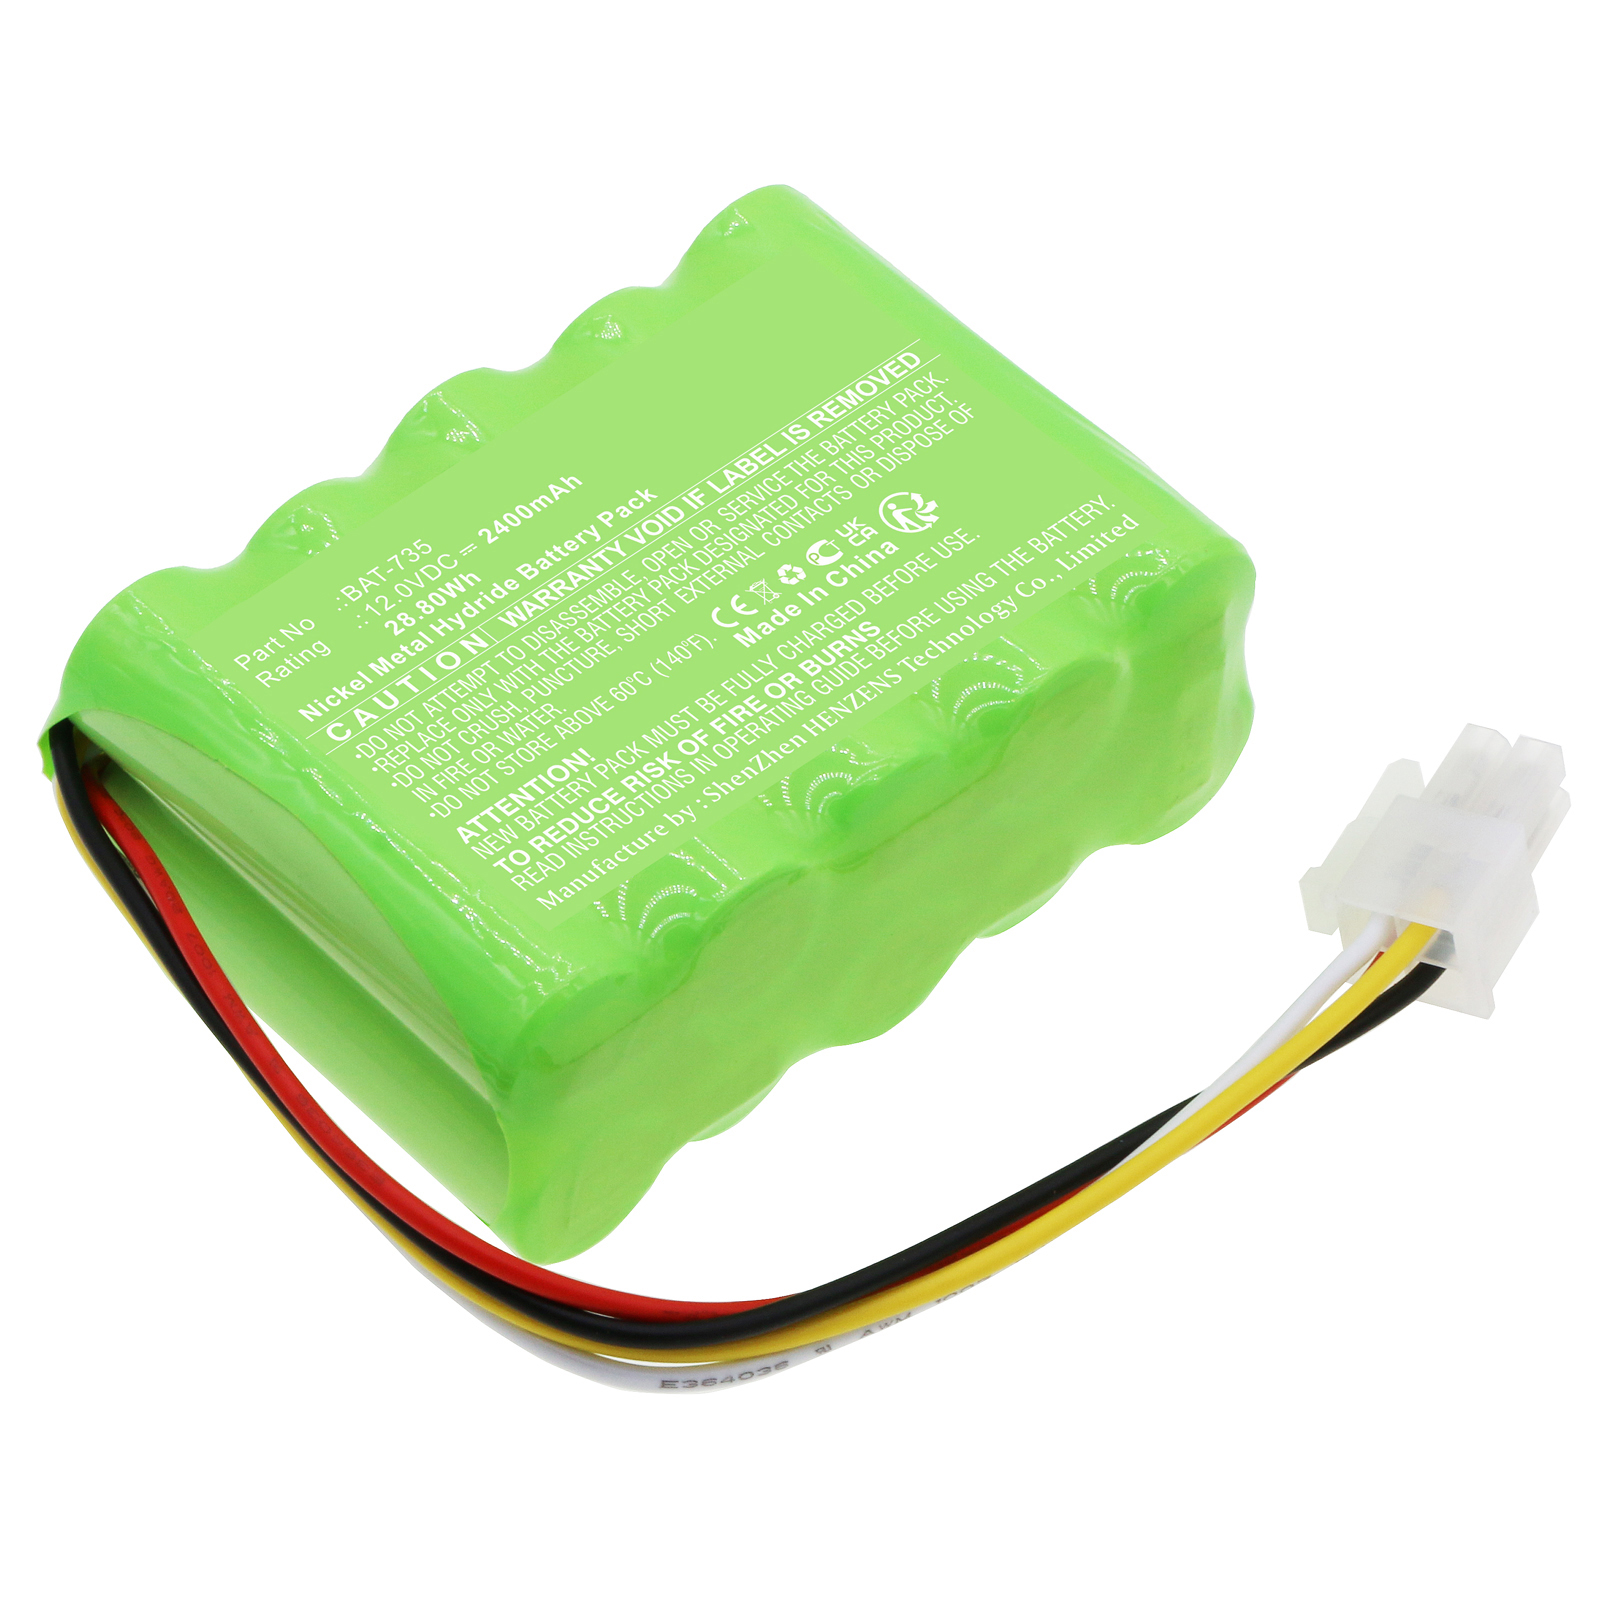 Synergy Digital Equipment Battery, Compatible with Shimpo BAT-735 Equipment Battery (Ni-MH, 12V, 2400mAh)